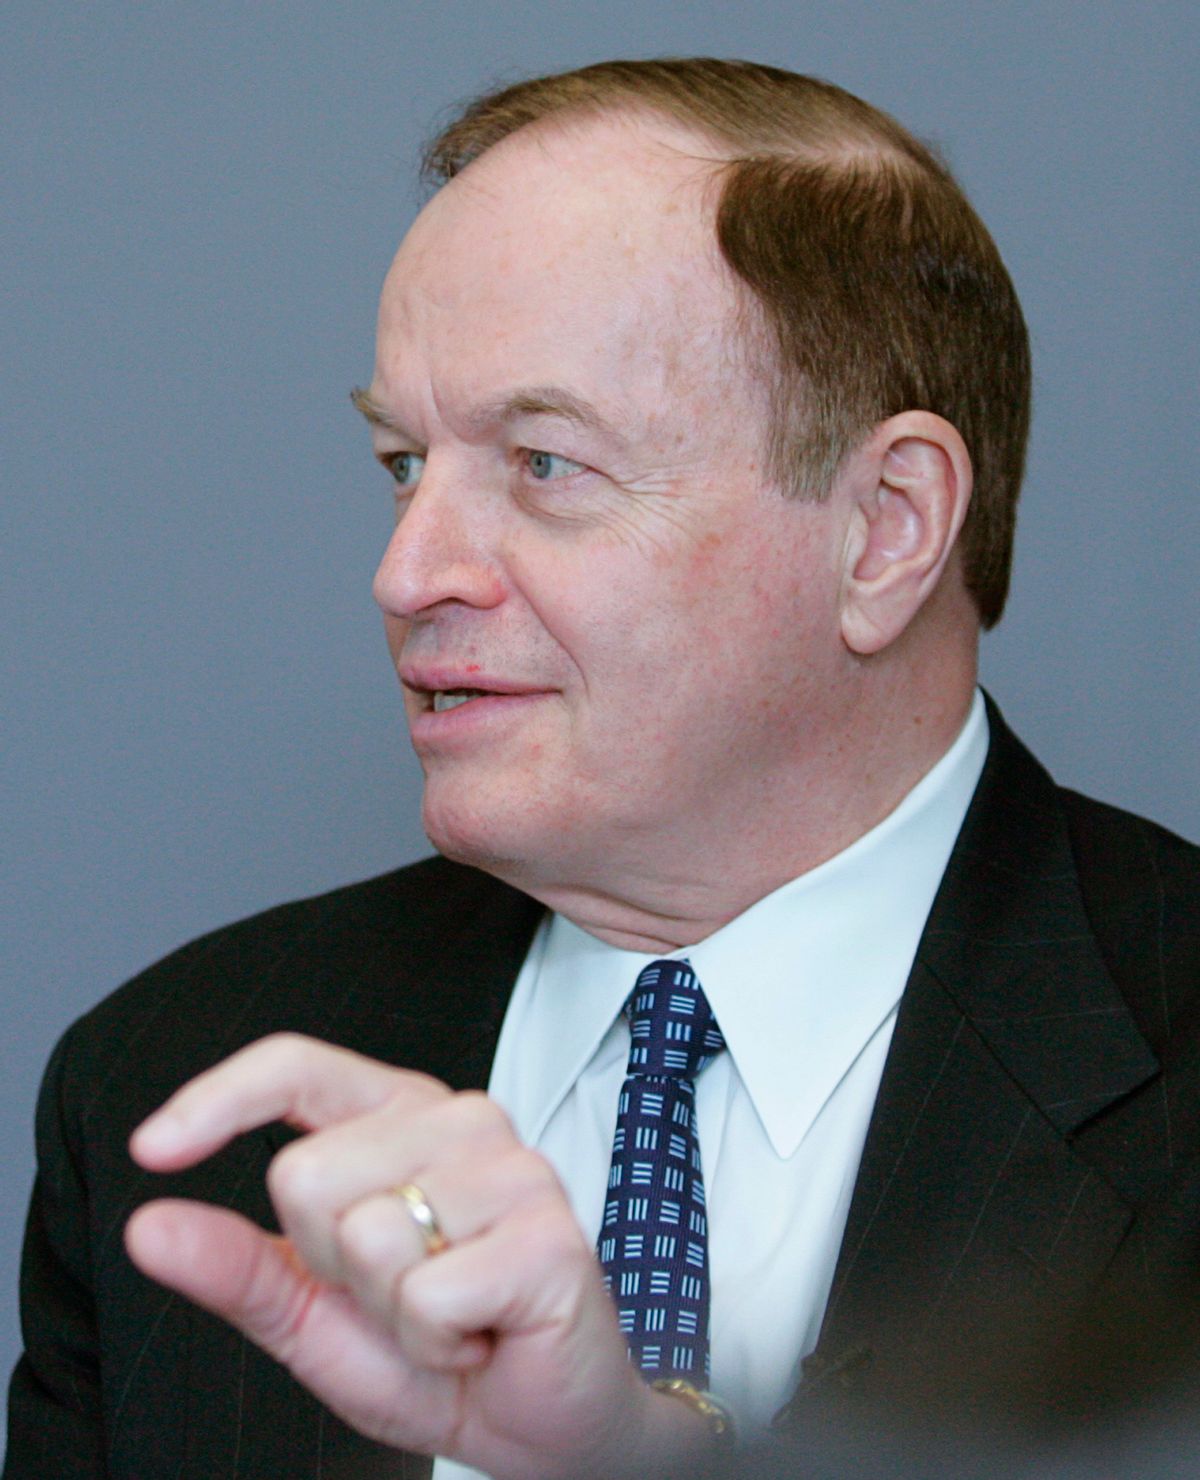 U.S. Sen Richard Shelby (R-AL) makes a point while taking questions at the Reuters Financial Regulation Summit in Washington, April 24, 2009. REUTERS/Stelios Varias (UNITED STATES POLITICS BUSINESS) (Reuters)